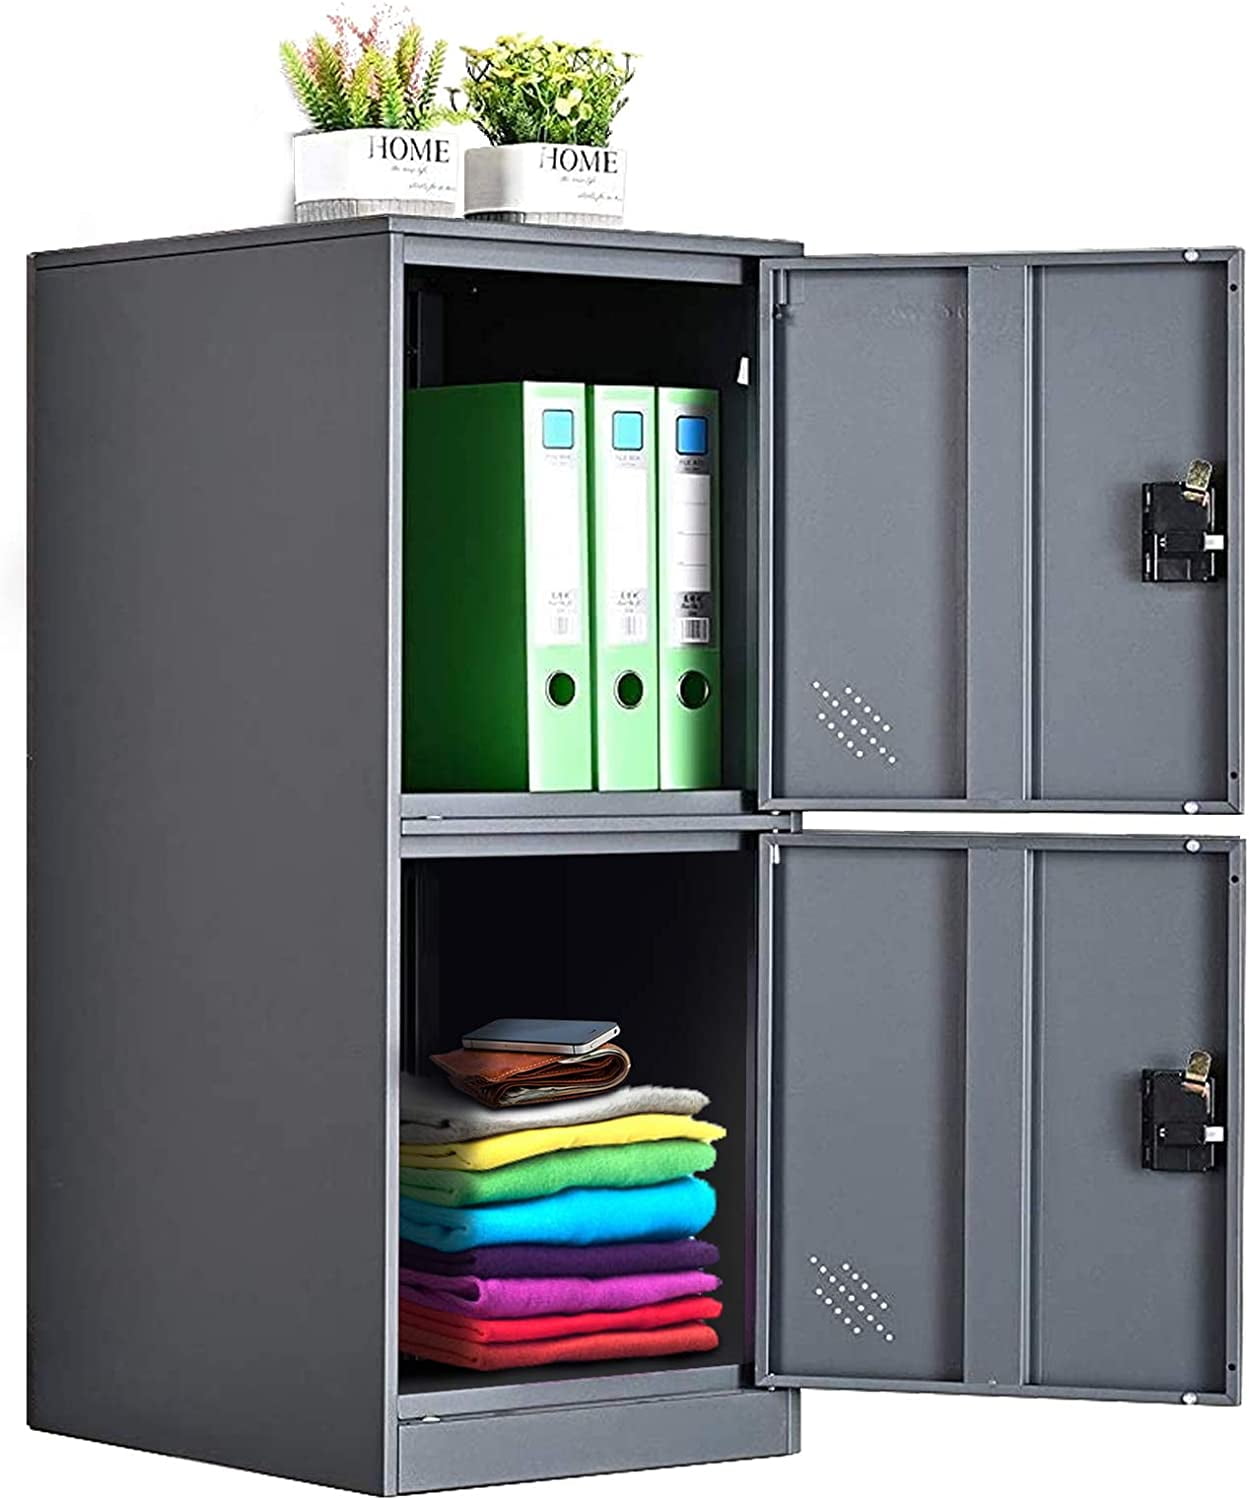 MECOLOR Vertical Single Tier Small Locker with Padlock latche 2 or 3 Compartment Storage for Employee,Home,Office,School,Kids Full White, P2V 